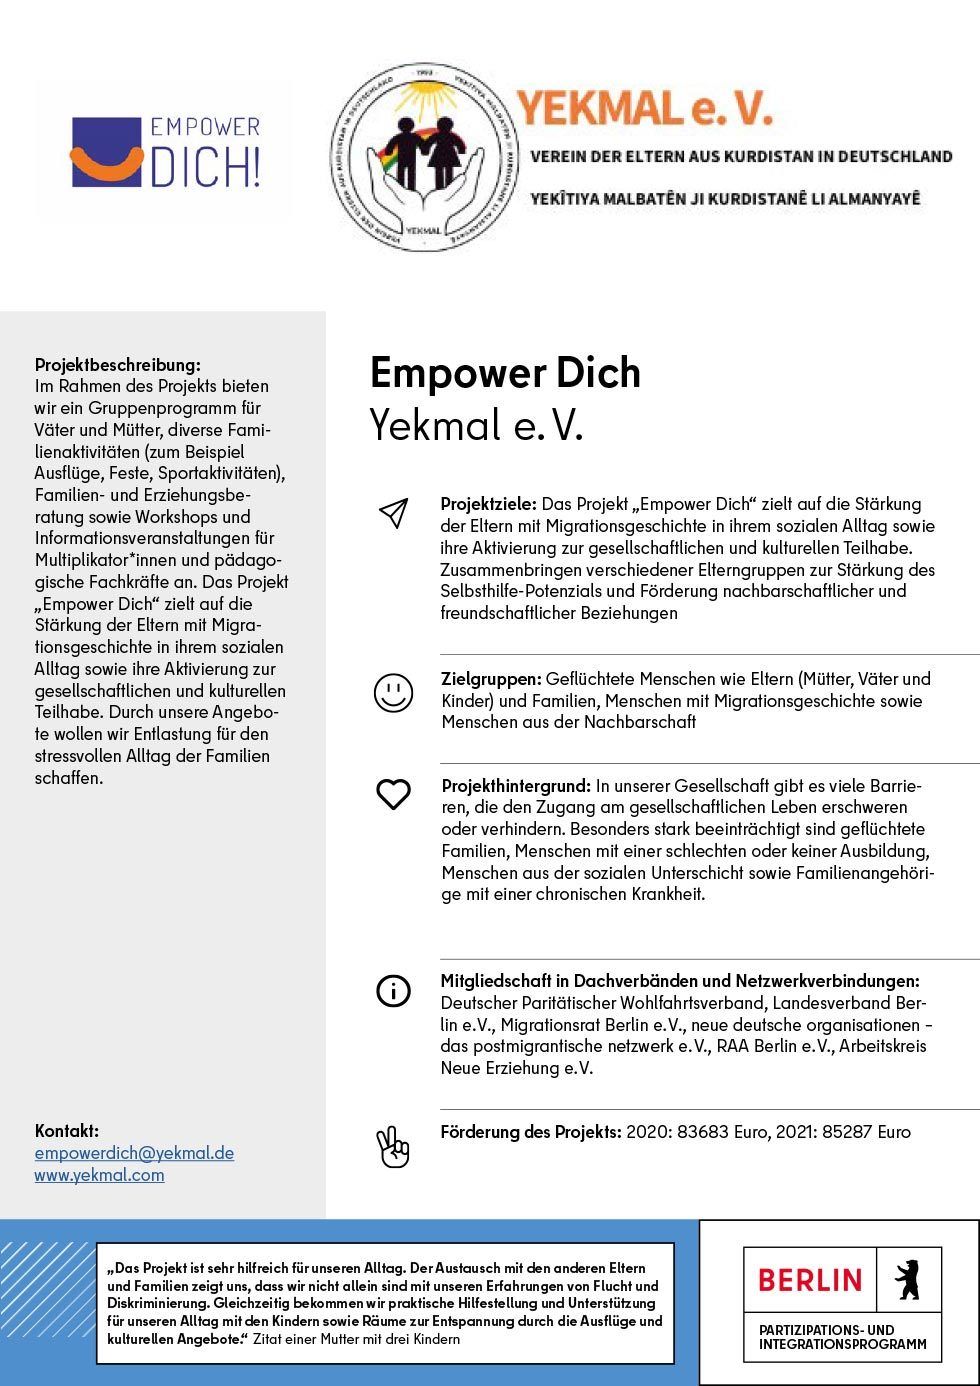 Empower-Dich-Yekmal